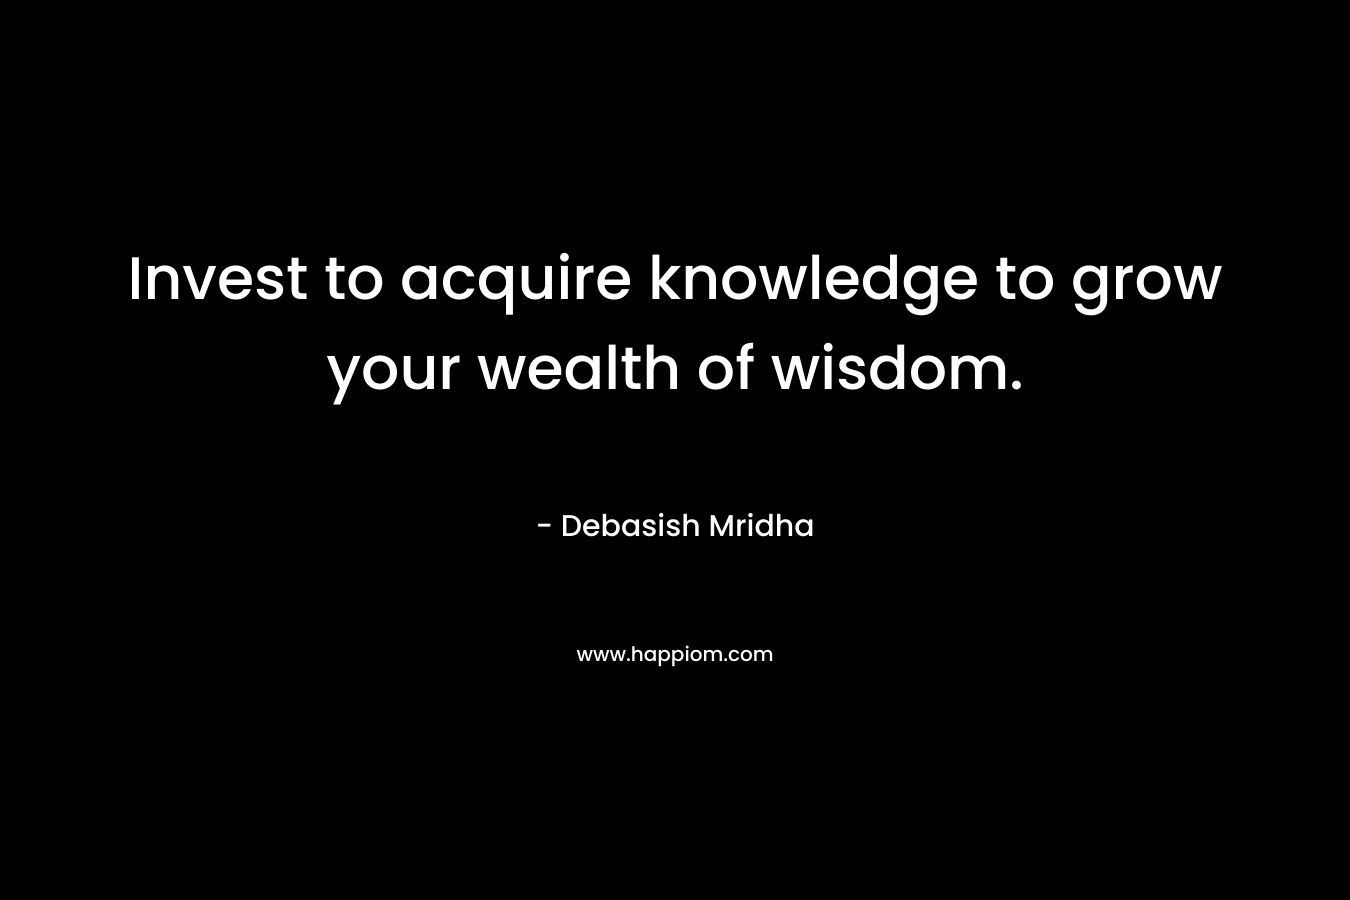 Invest to acquire knowledge to grow your wealth of wisdom.